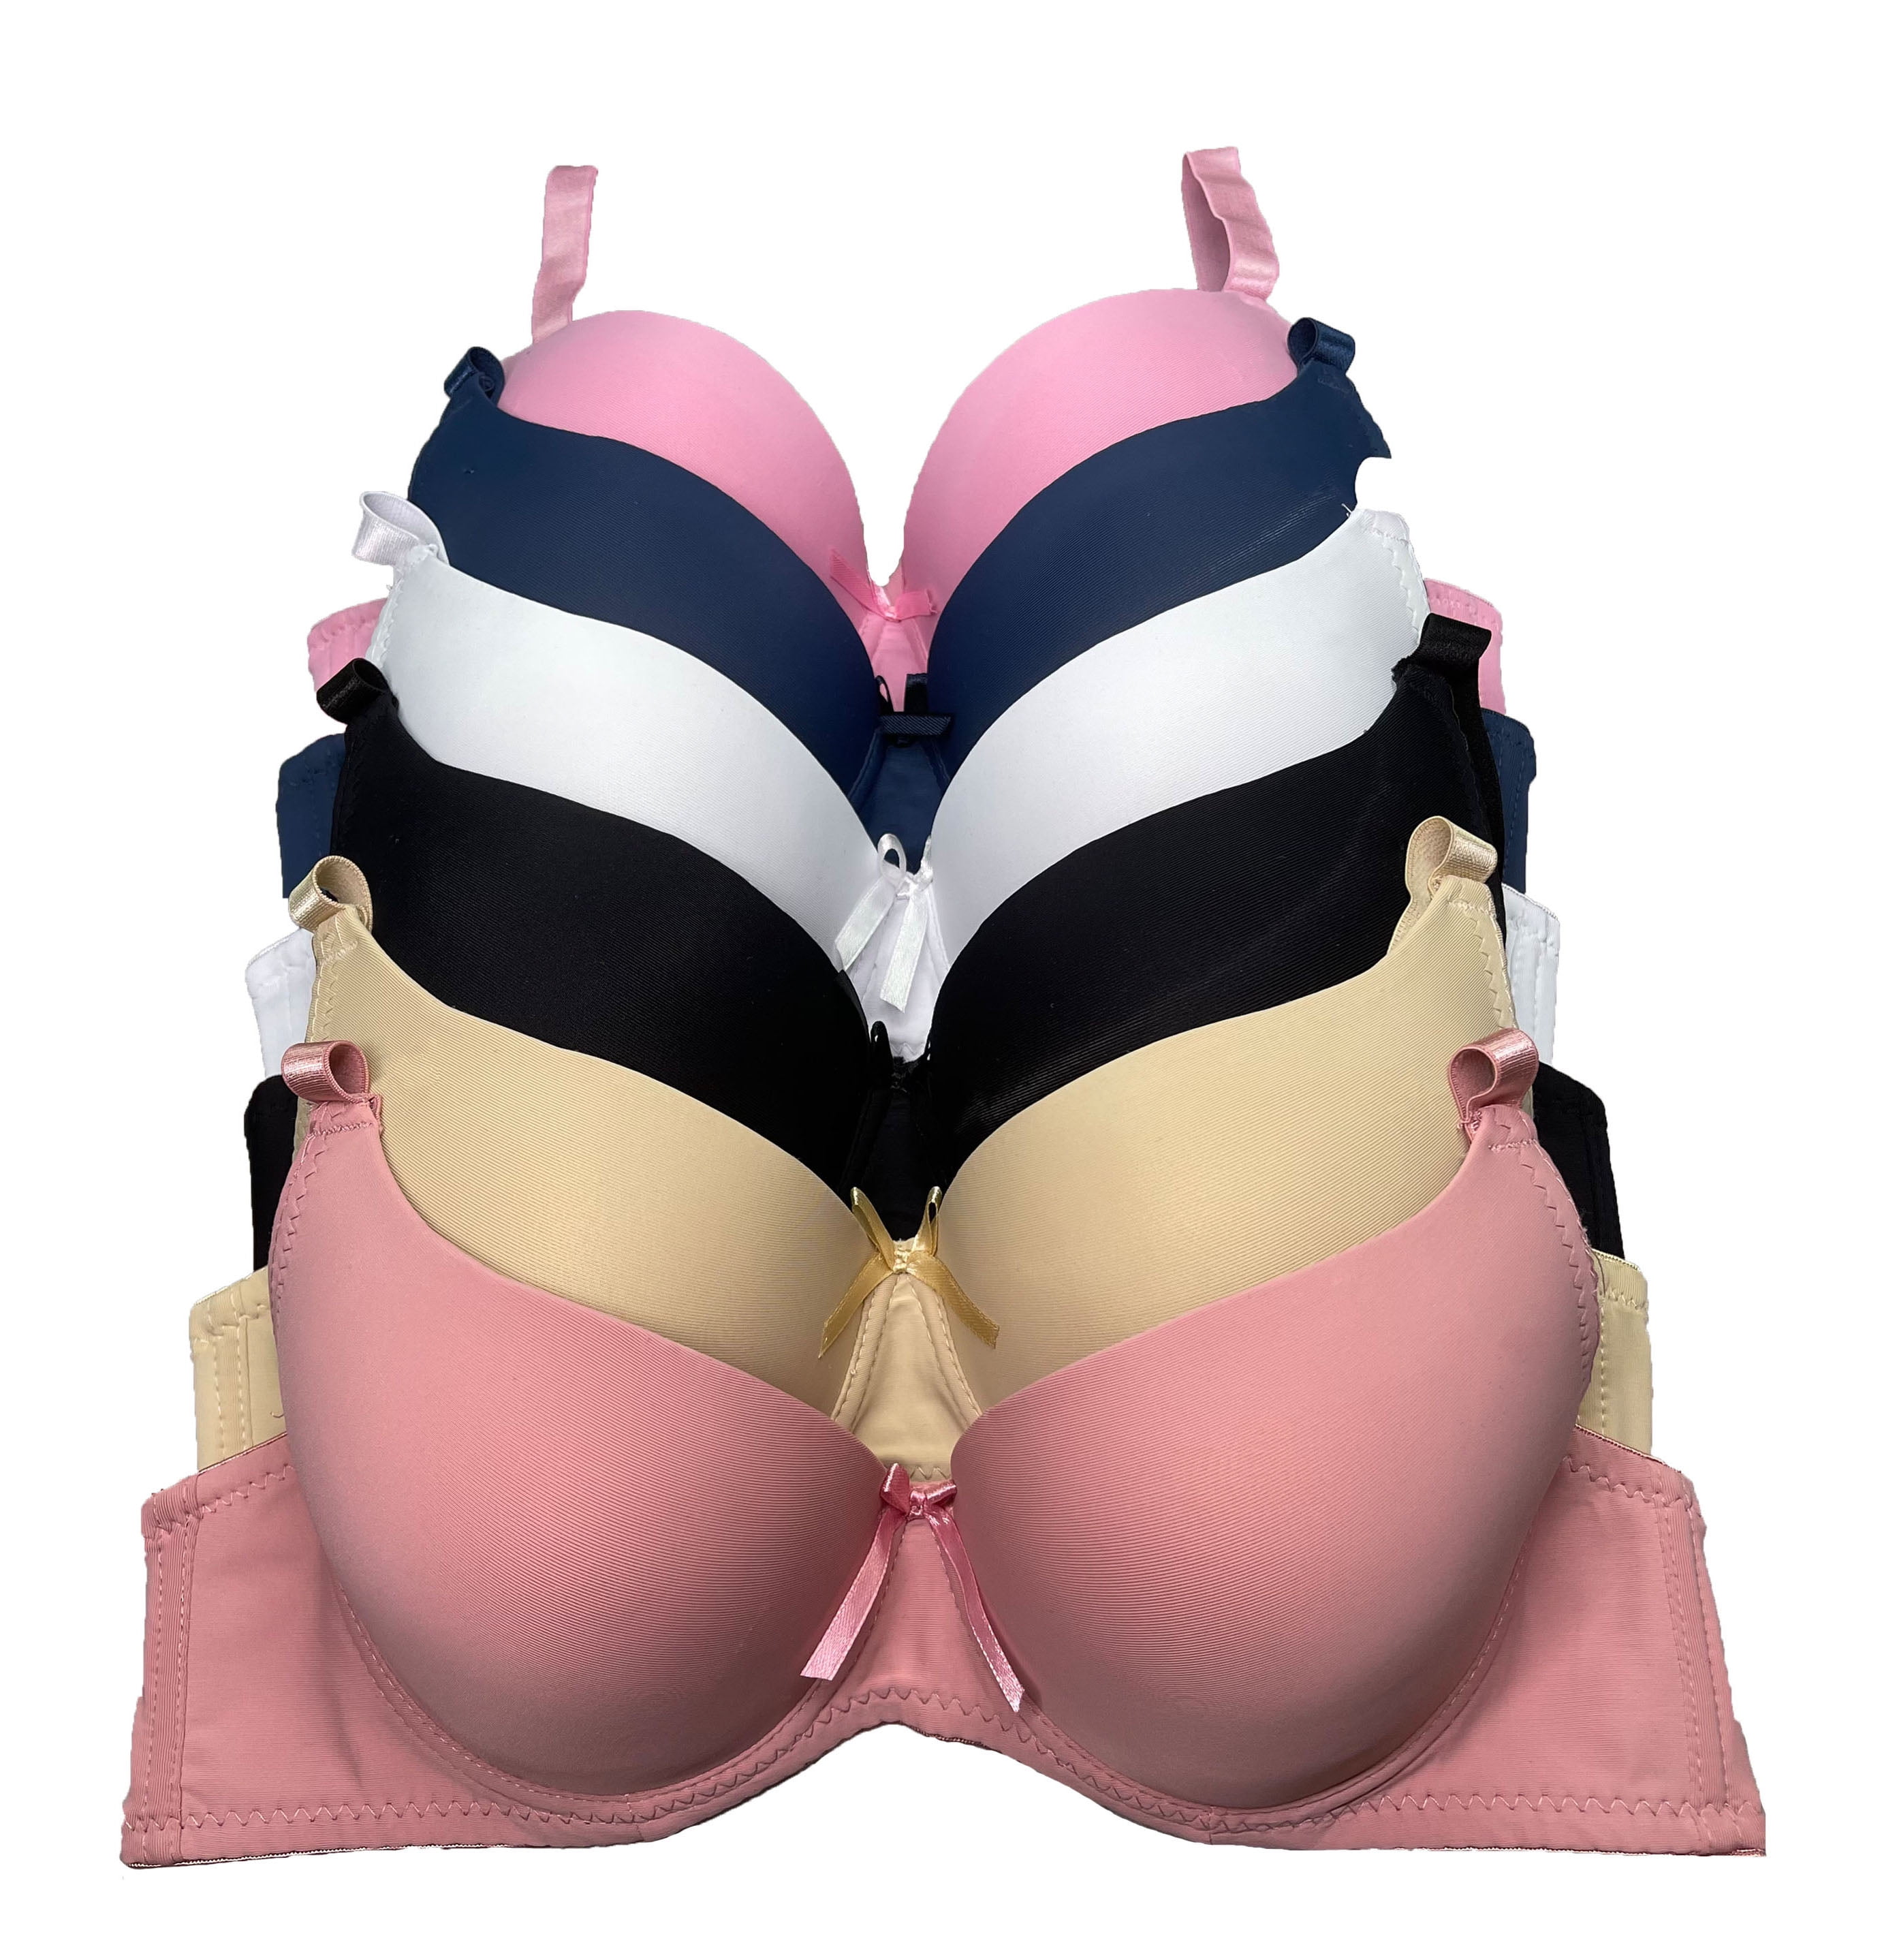 Women Bras 6 pack of T-shirt Bra B cup C cup D cup DD cup DDD cup 40C (9289)